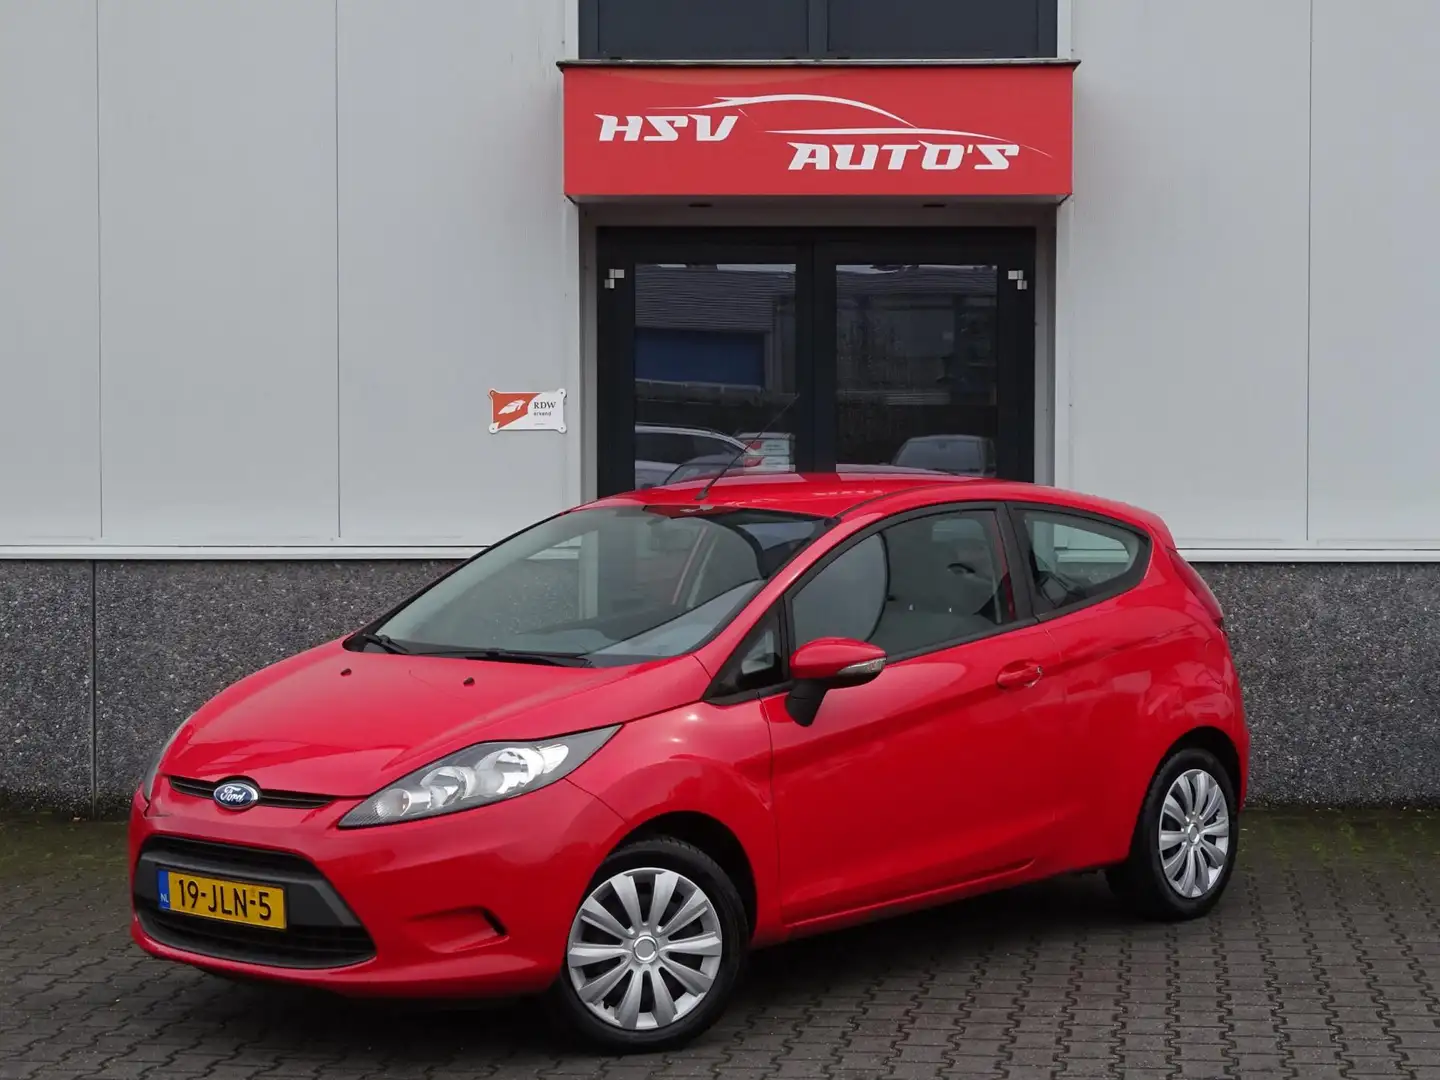 Ford Fiesta 1.25 Trend airco org NL 2009 Red - 1